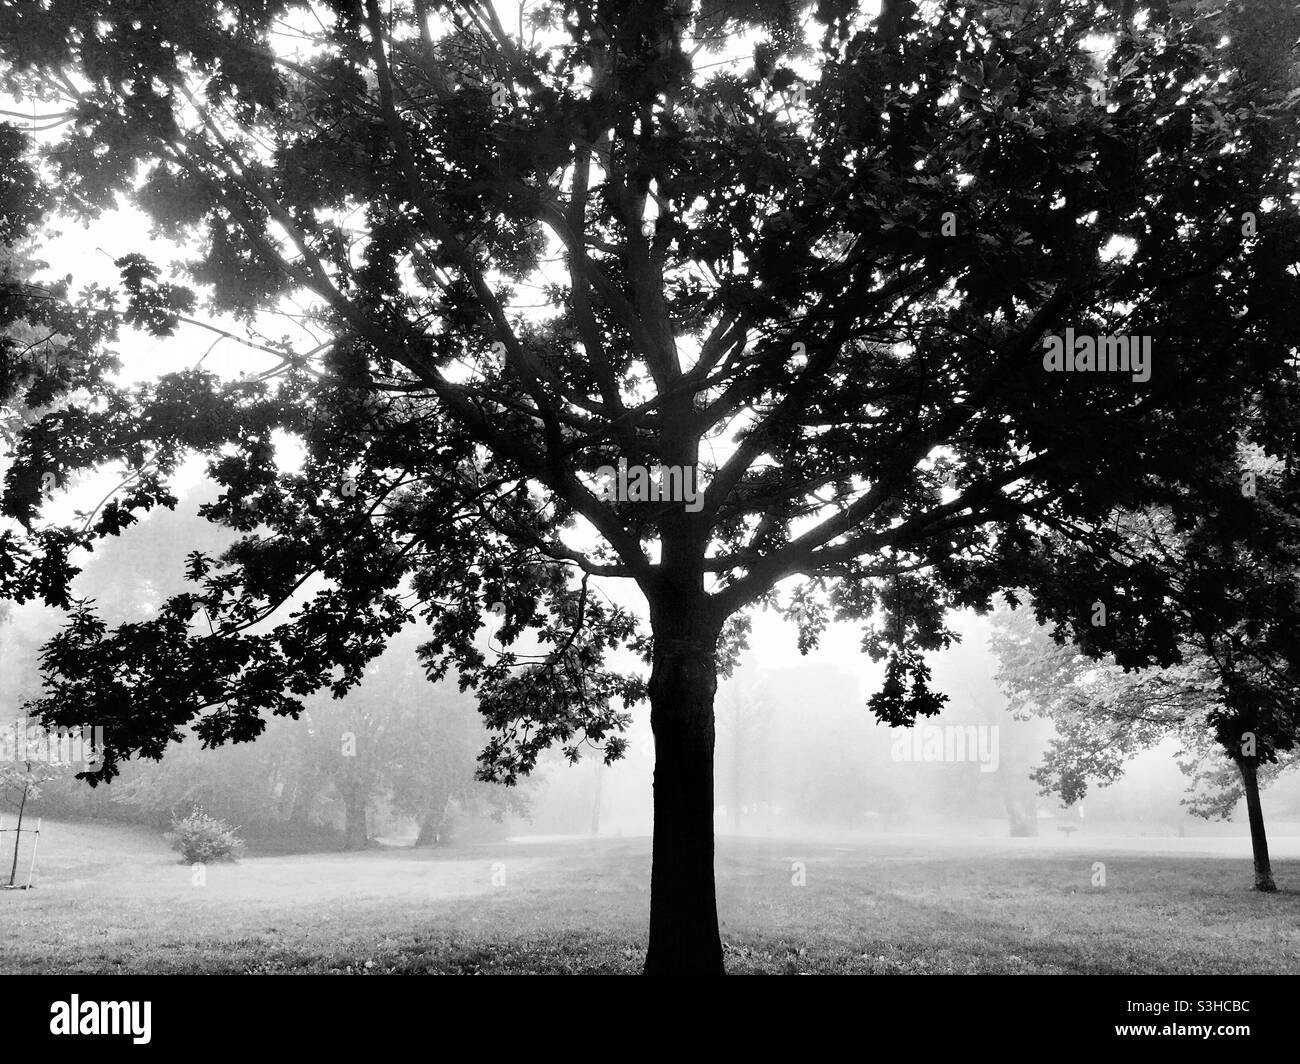 Foggy morning in B&W, a London-fog-like scene in Ontario, Canada. Concepts: tranquility, haze, peace, monochrome, mystery, calm. Stock Photo